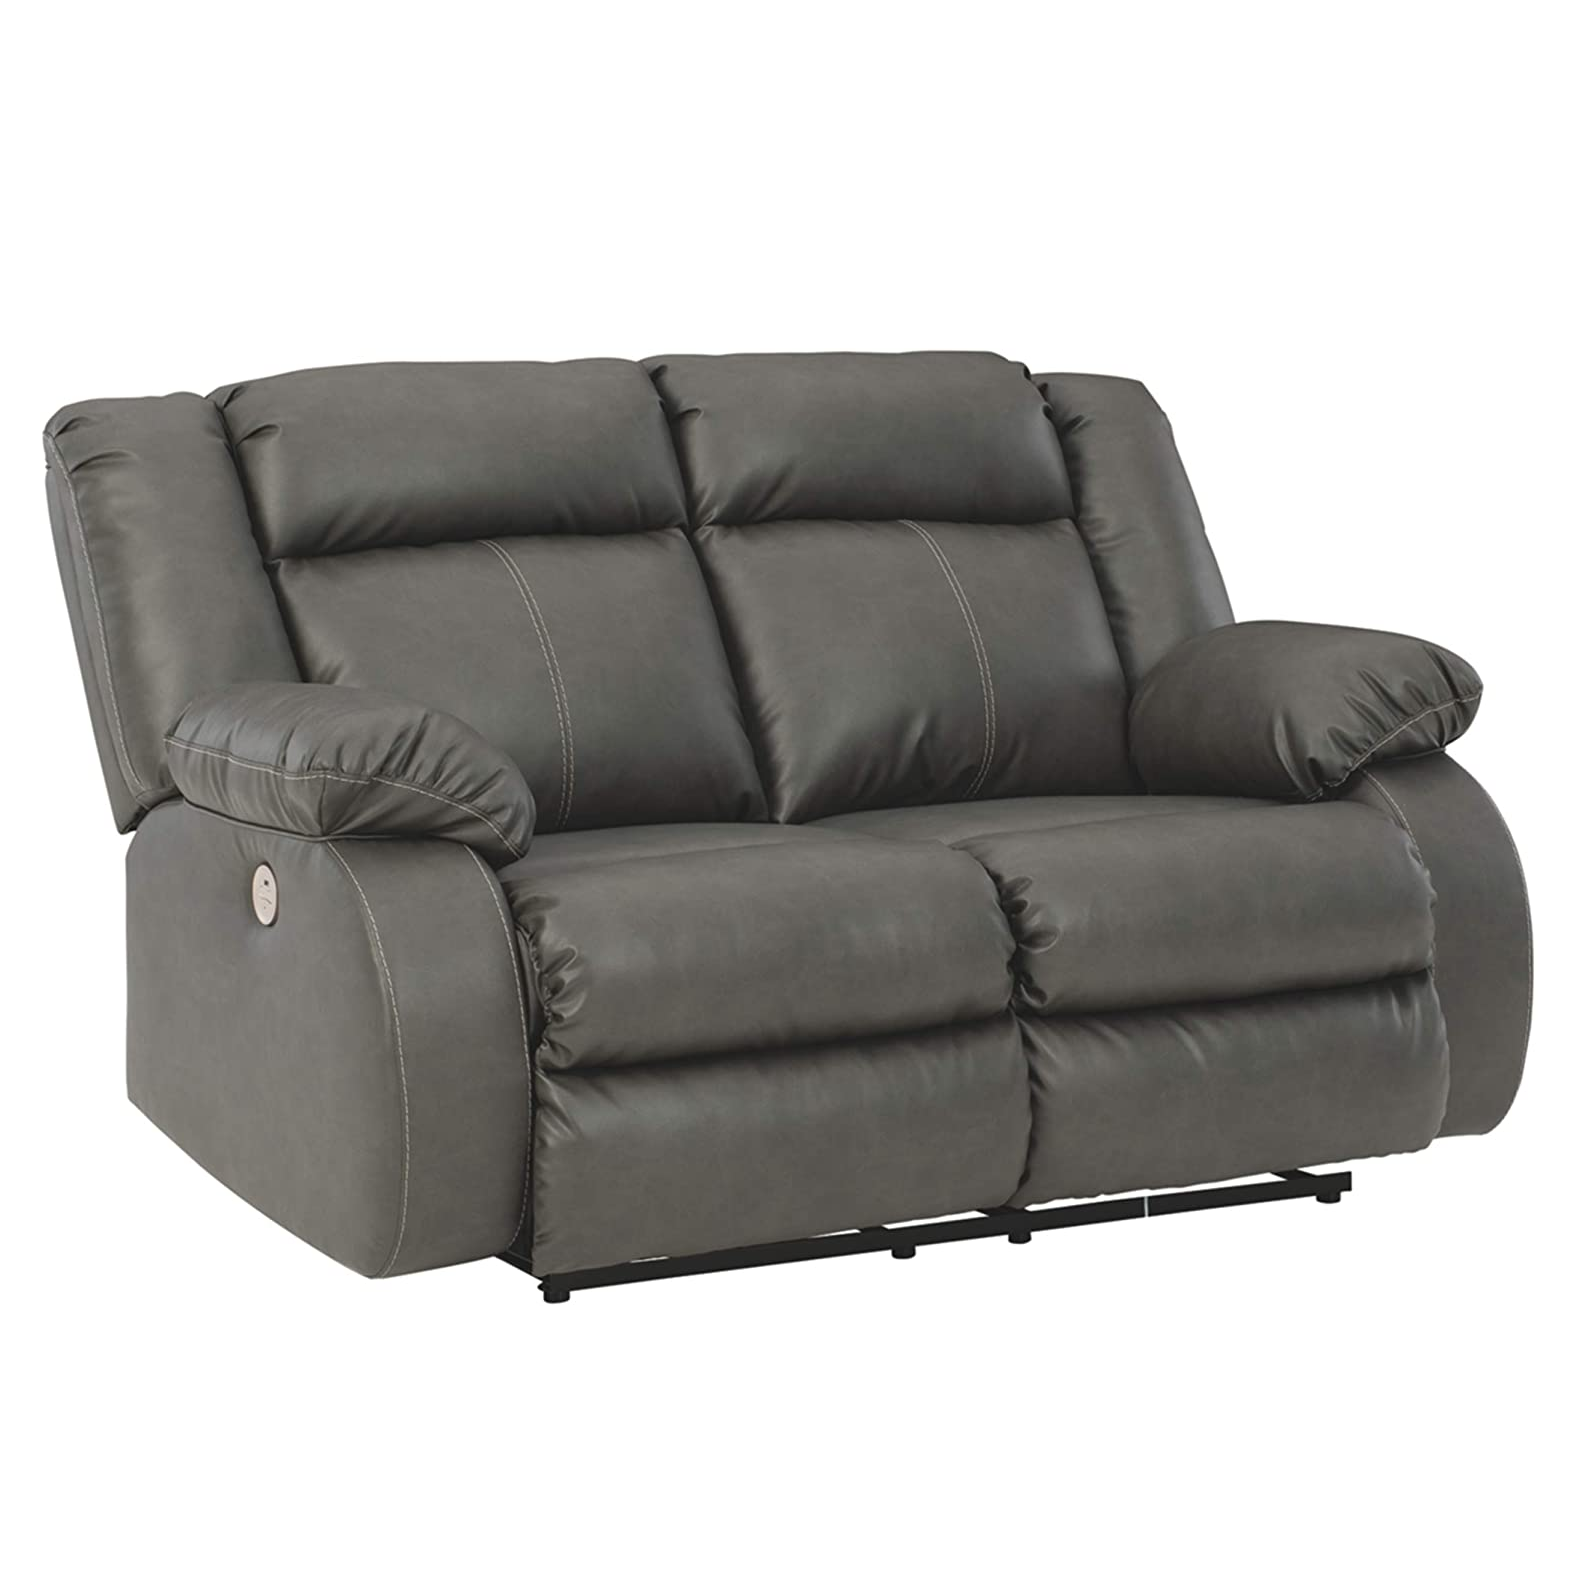 China wholesale Recliner Sofa For Home Theater - 2 Seater Recliner Sofa – JKY